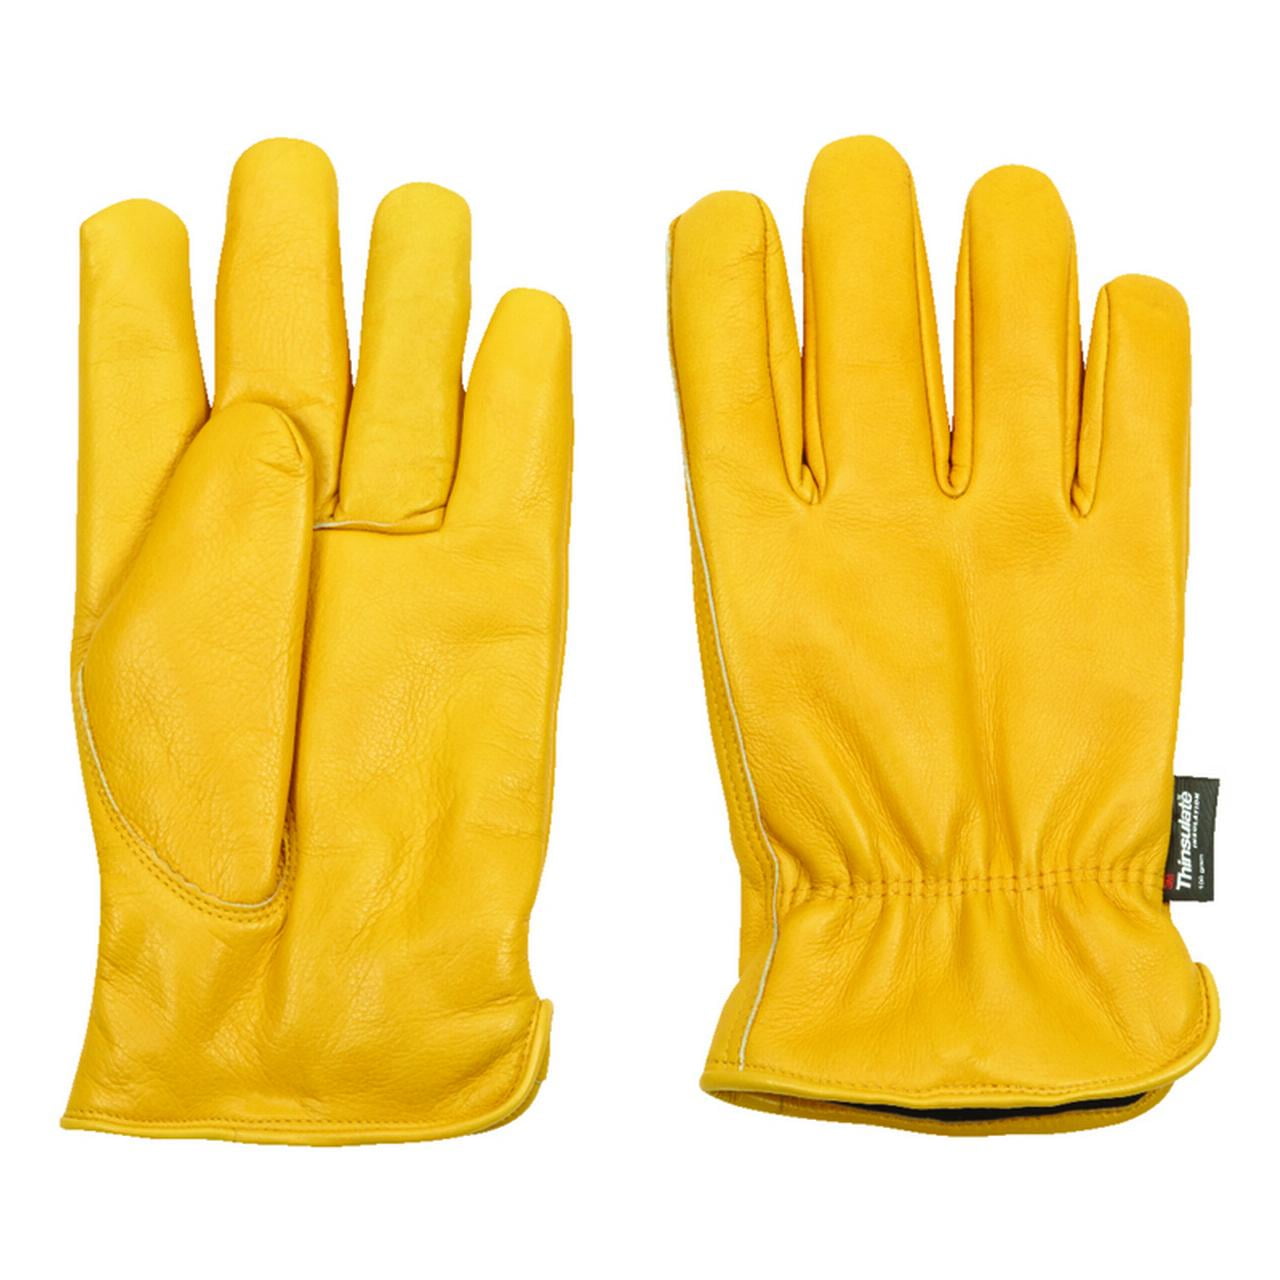 Wells Lamont Mens Leather Work Gloves